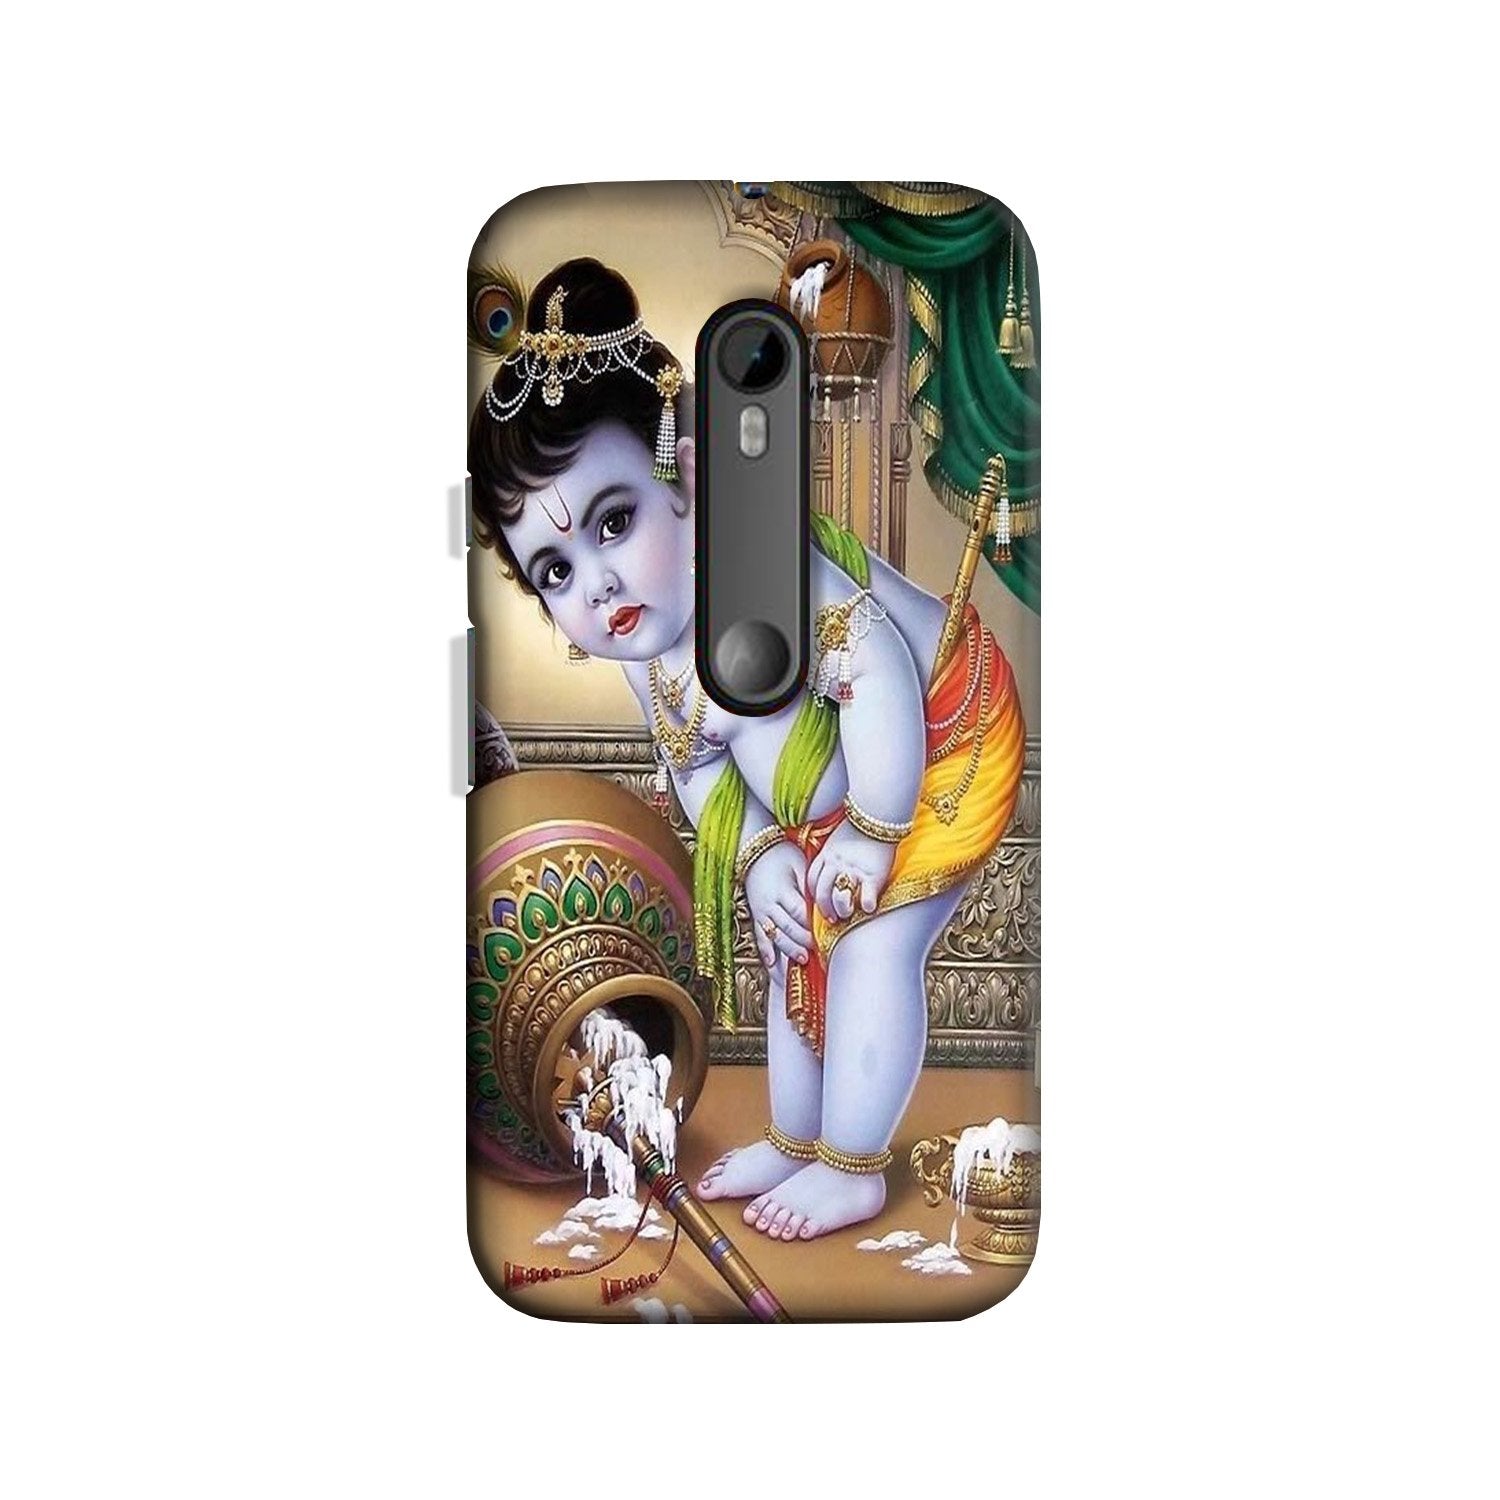 Bal Gopal2 Case for Moto X Style